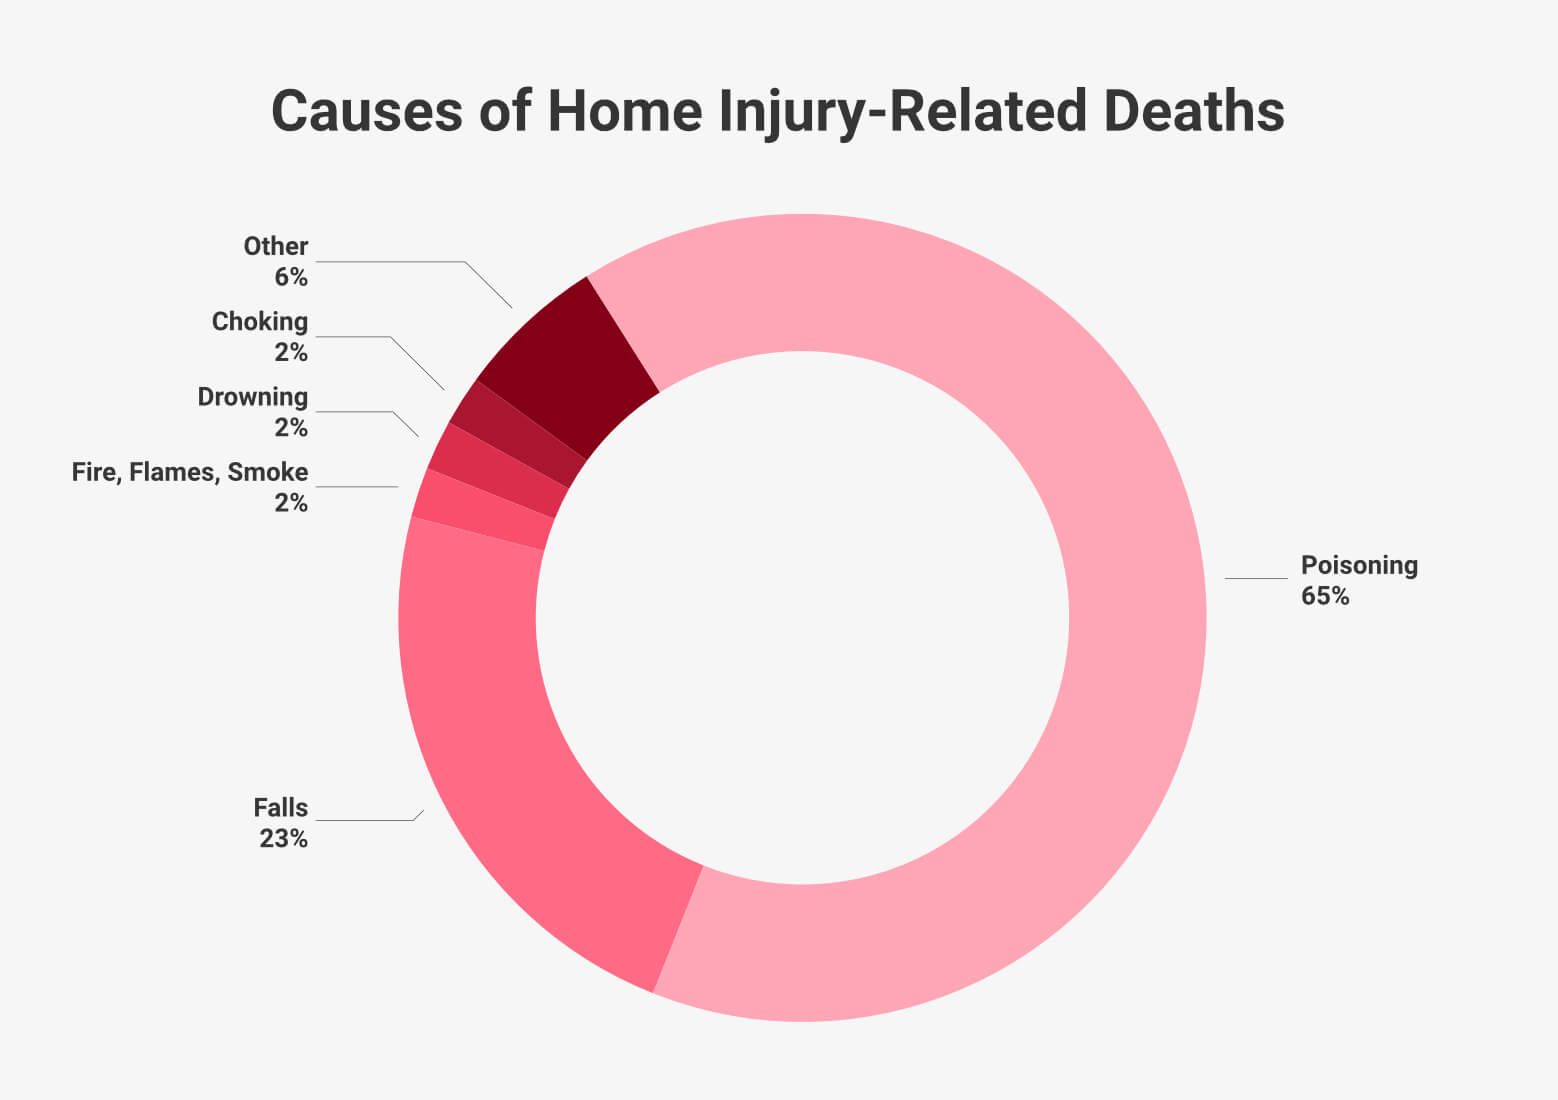 Causes of Home Accident Deaths